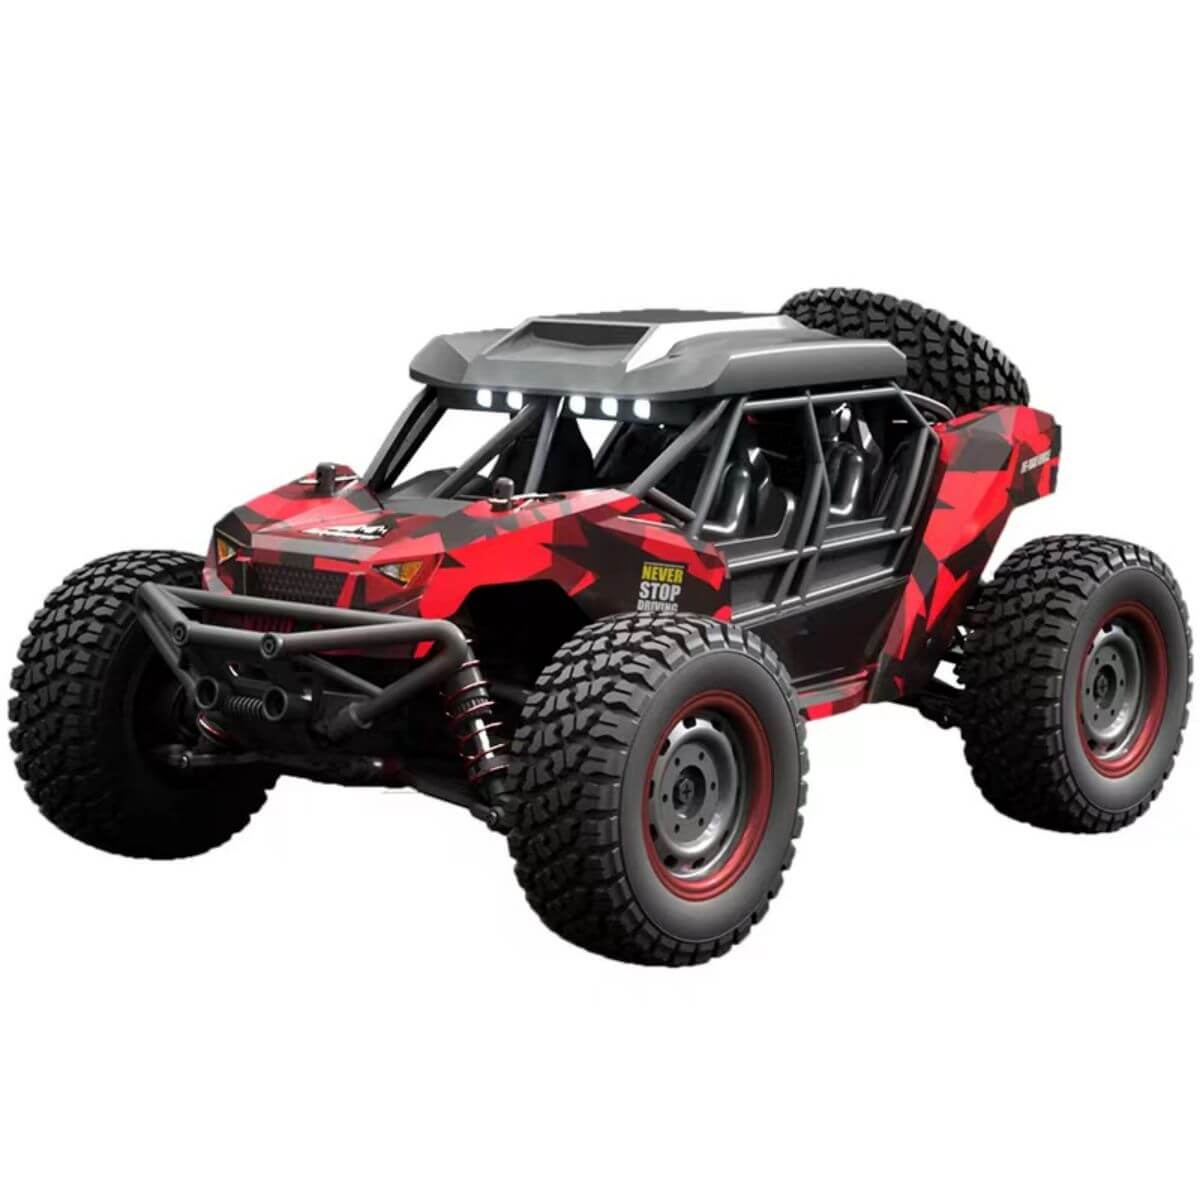 4 Wheel Drive Remote Control Off-Road Vehicle Red - WBRC-W105